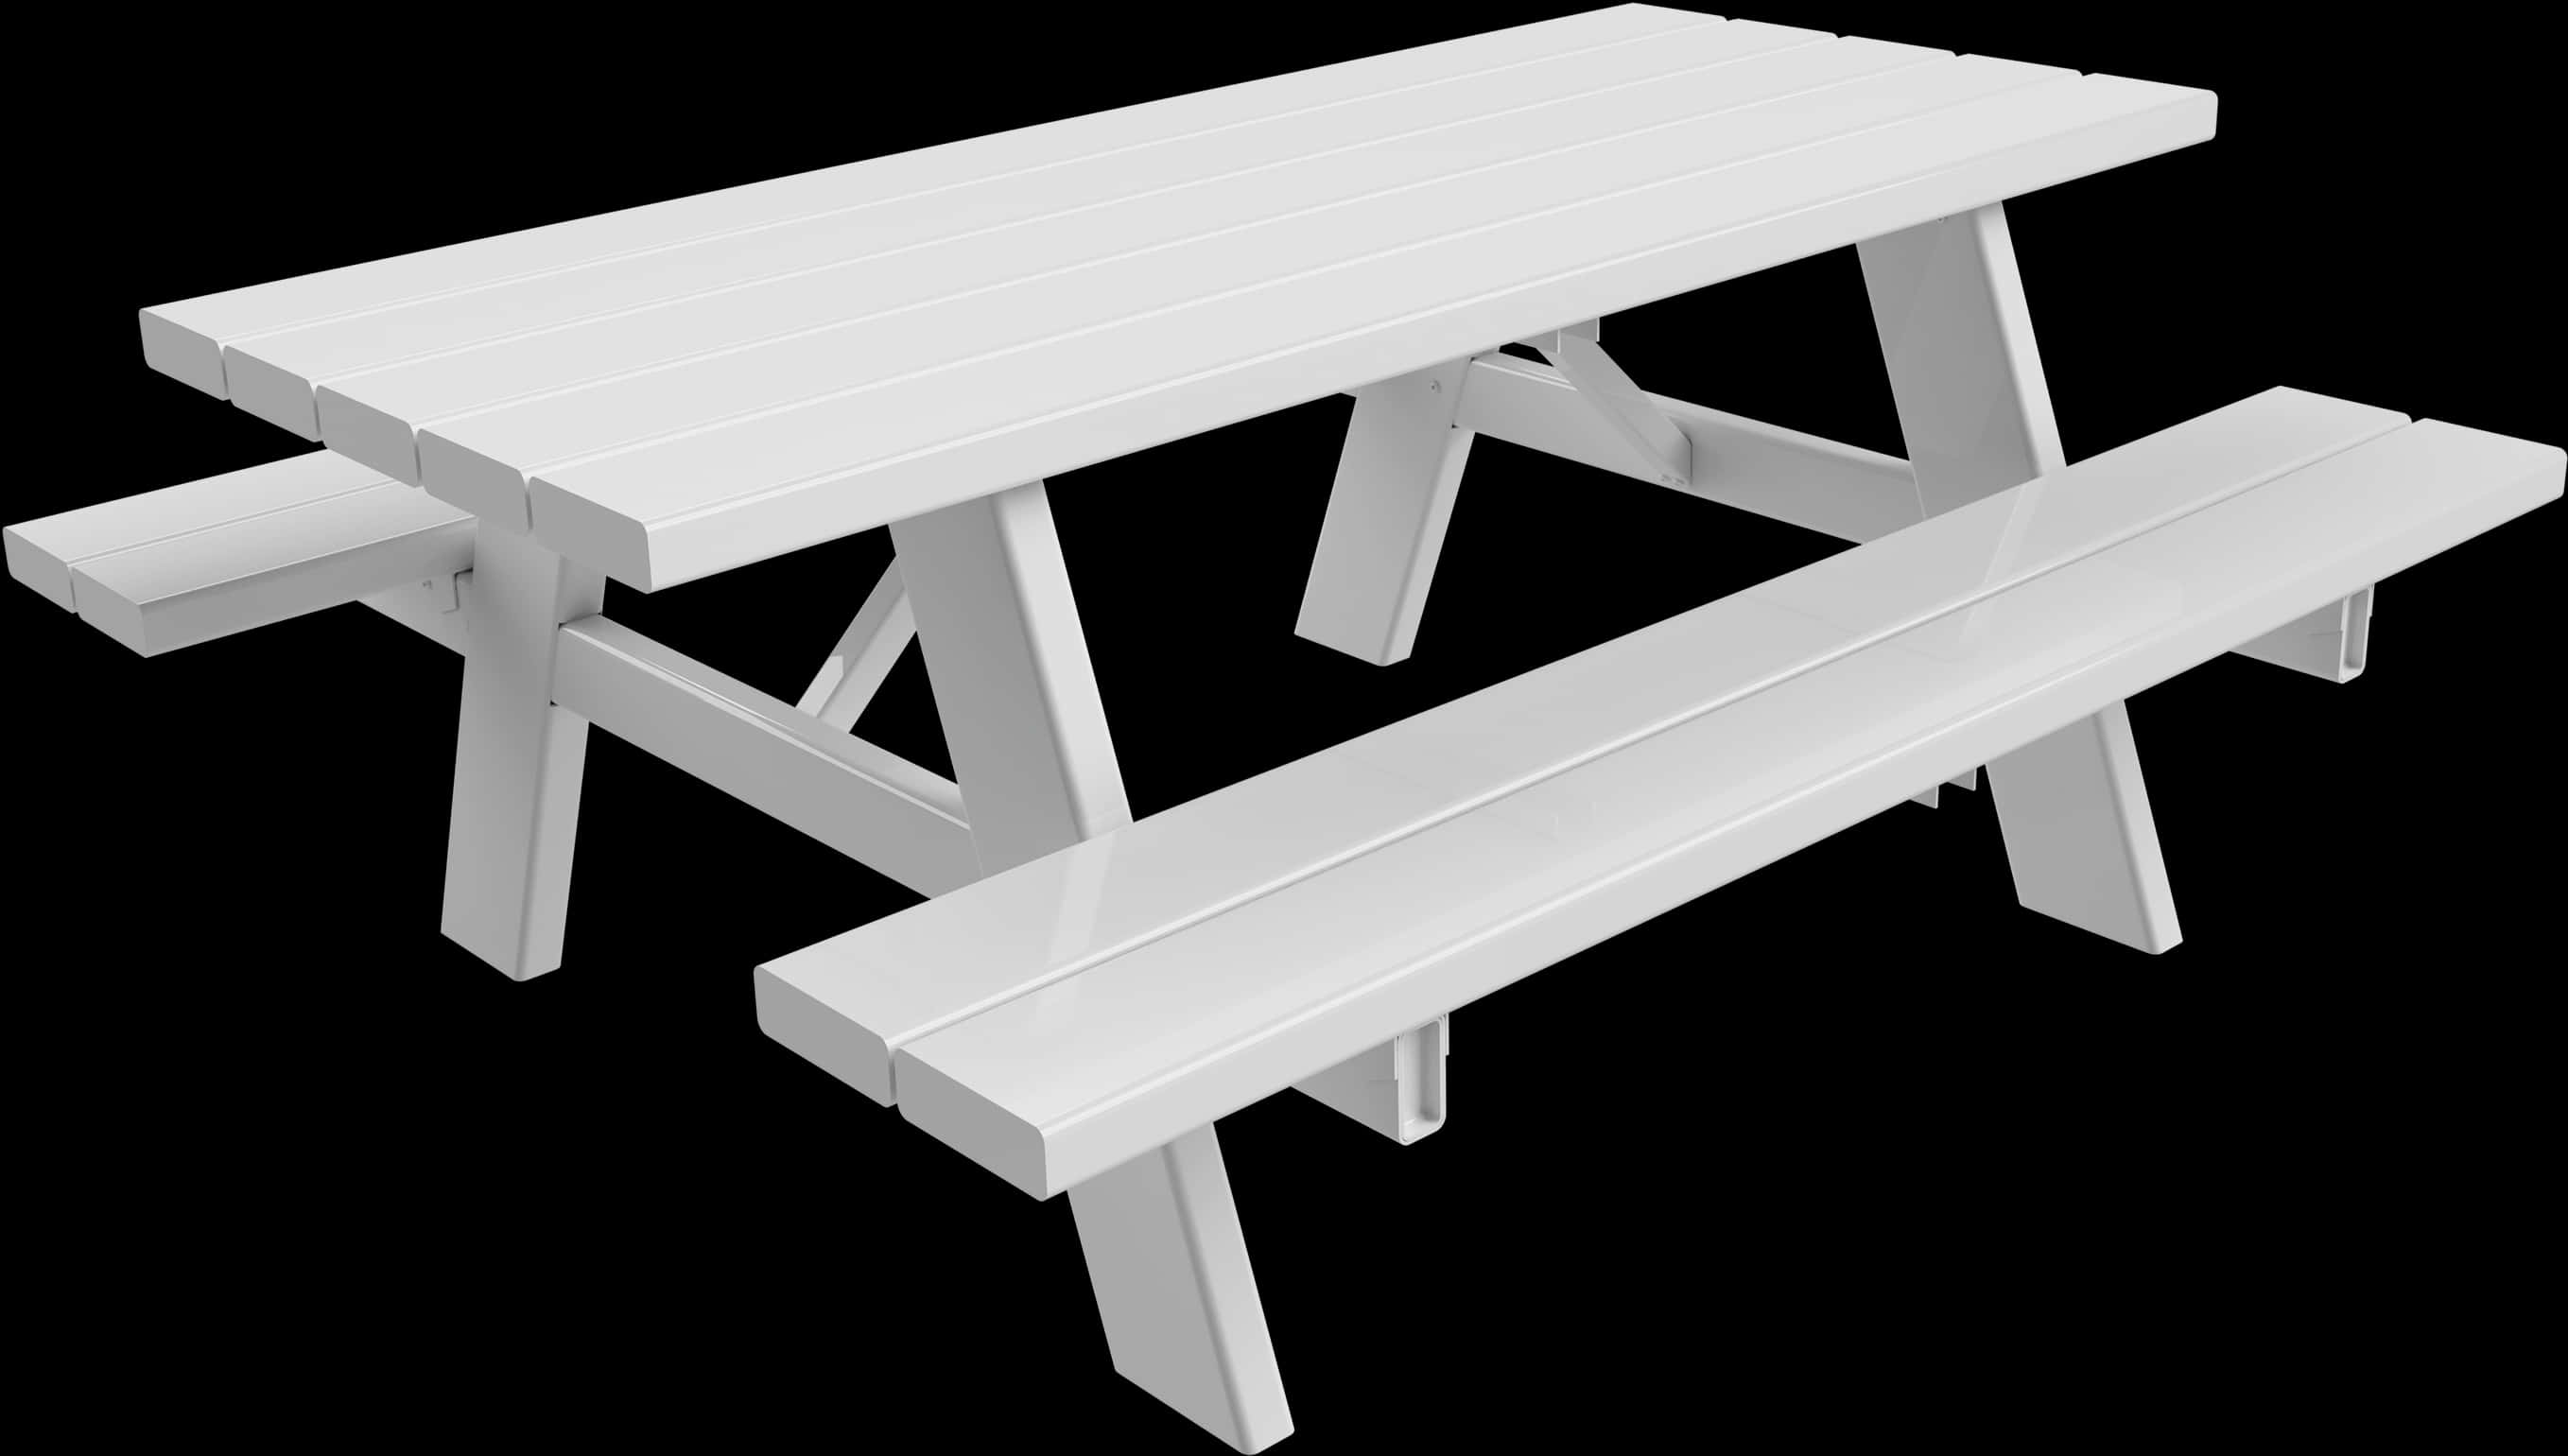 A White Picnic Table With Benches